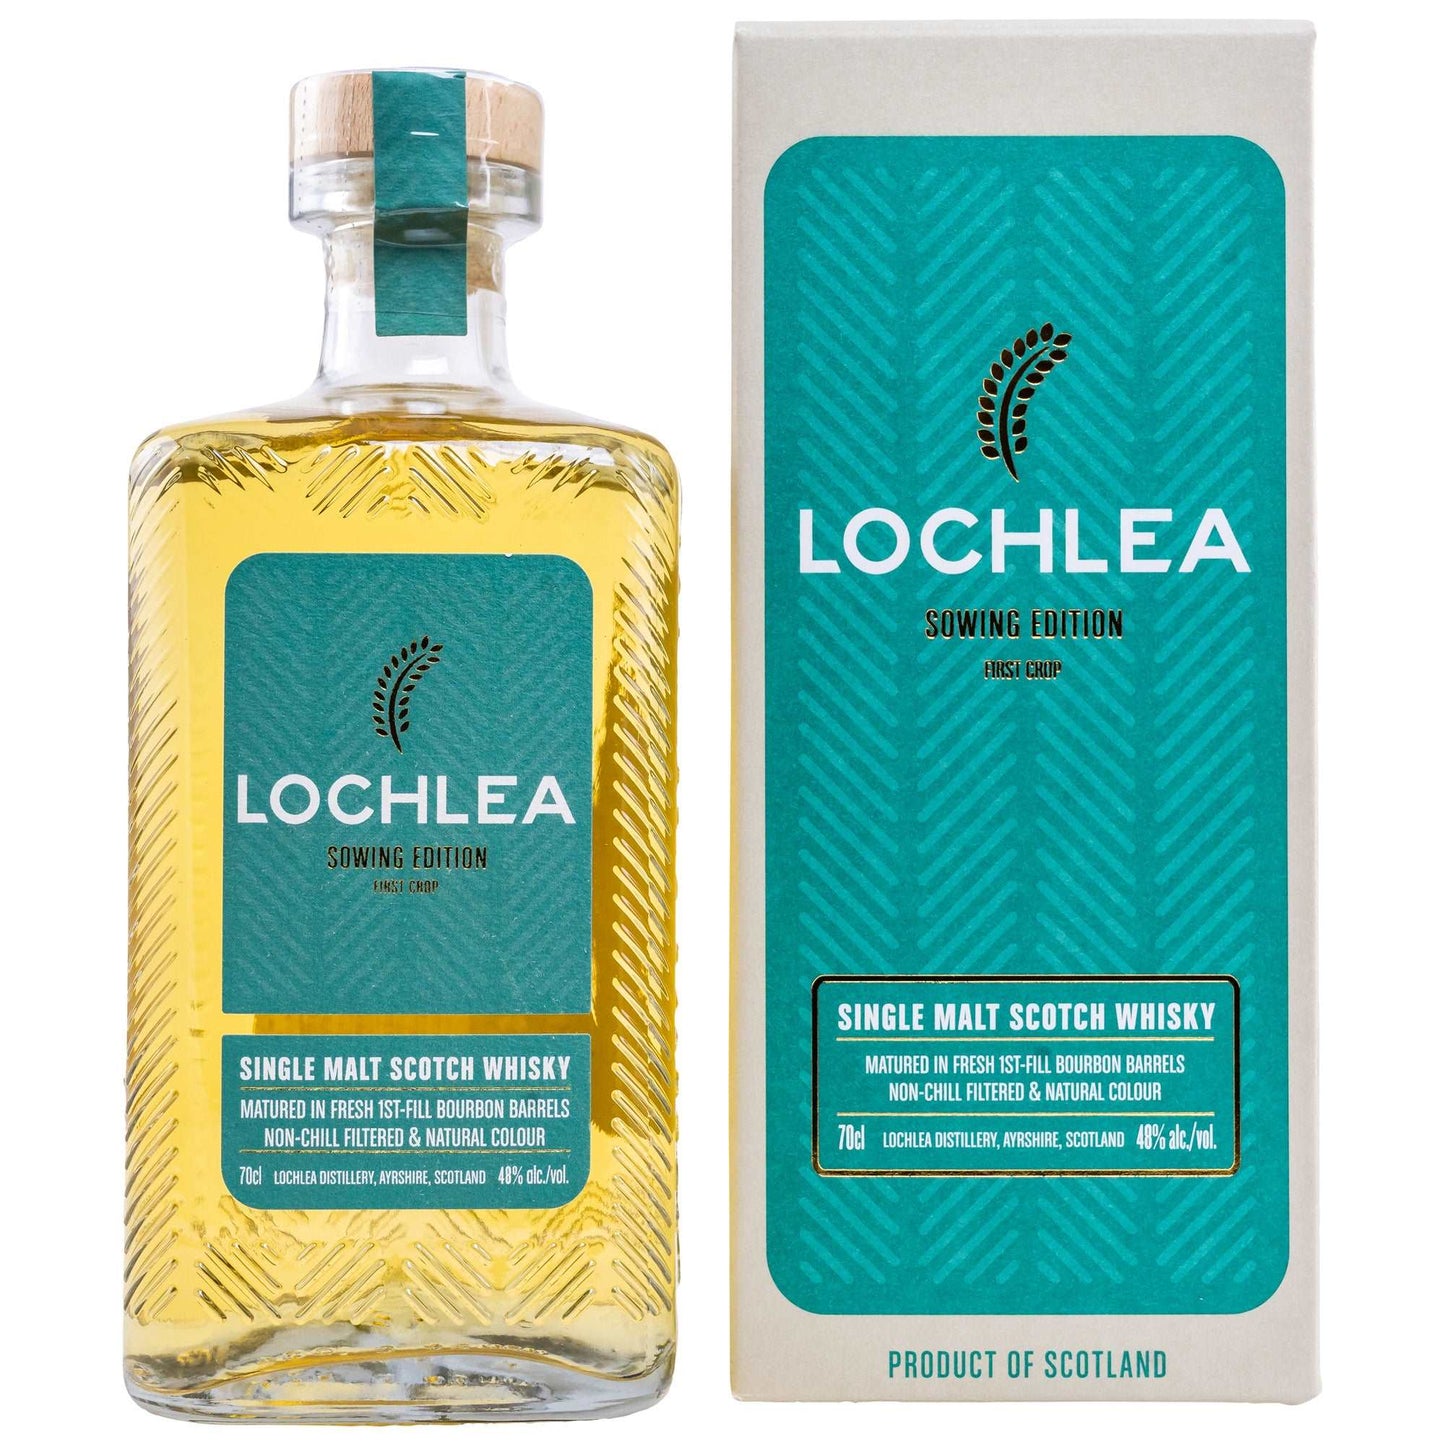 Lochlea | Sowing Edition | First Crop | 0,7l | 48%GET A BOTTLE